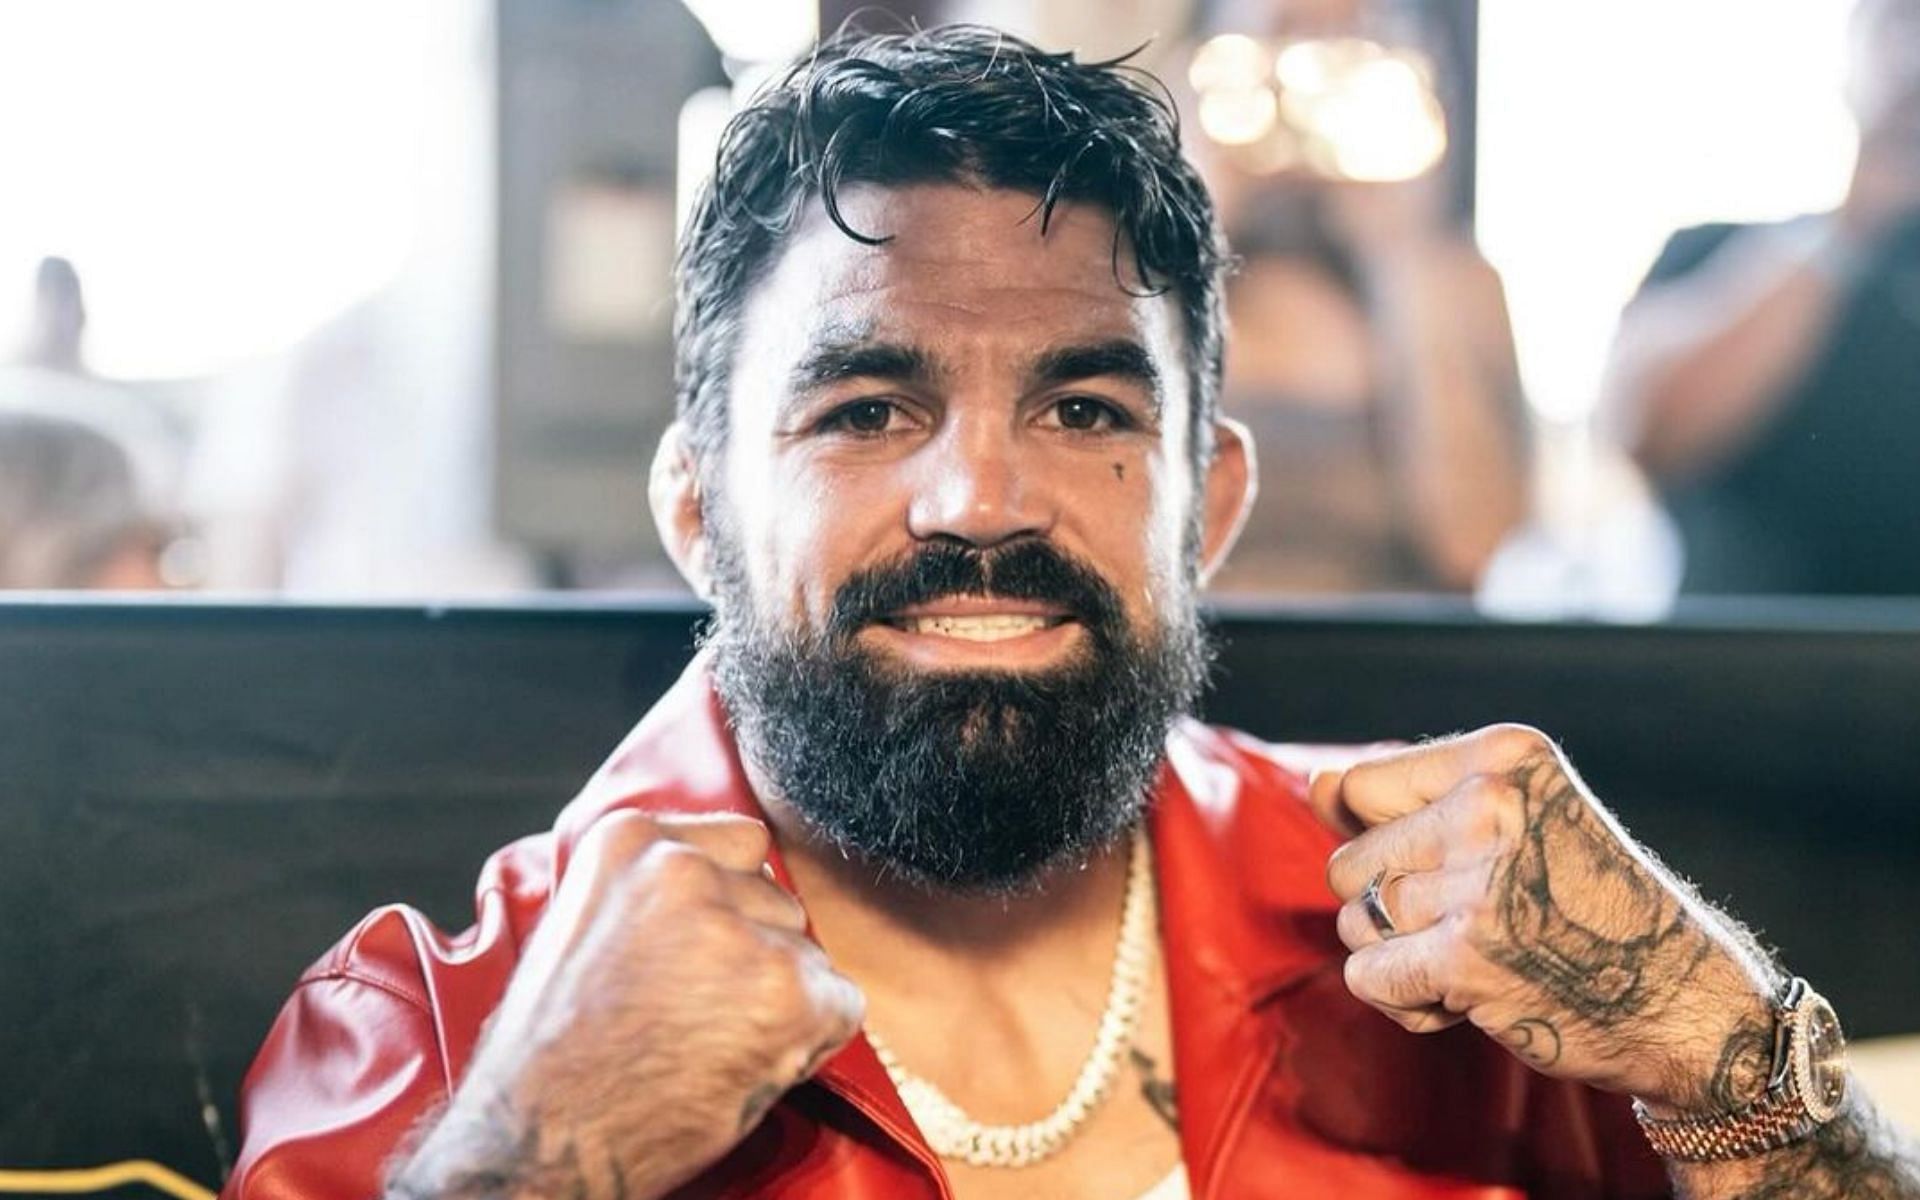 Mike Perry faces a lengthy suspension [Image via:@platinummikeperry on Instagram]